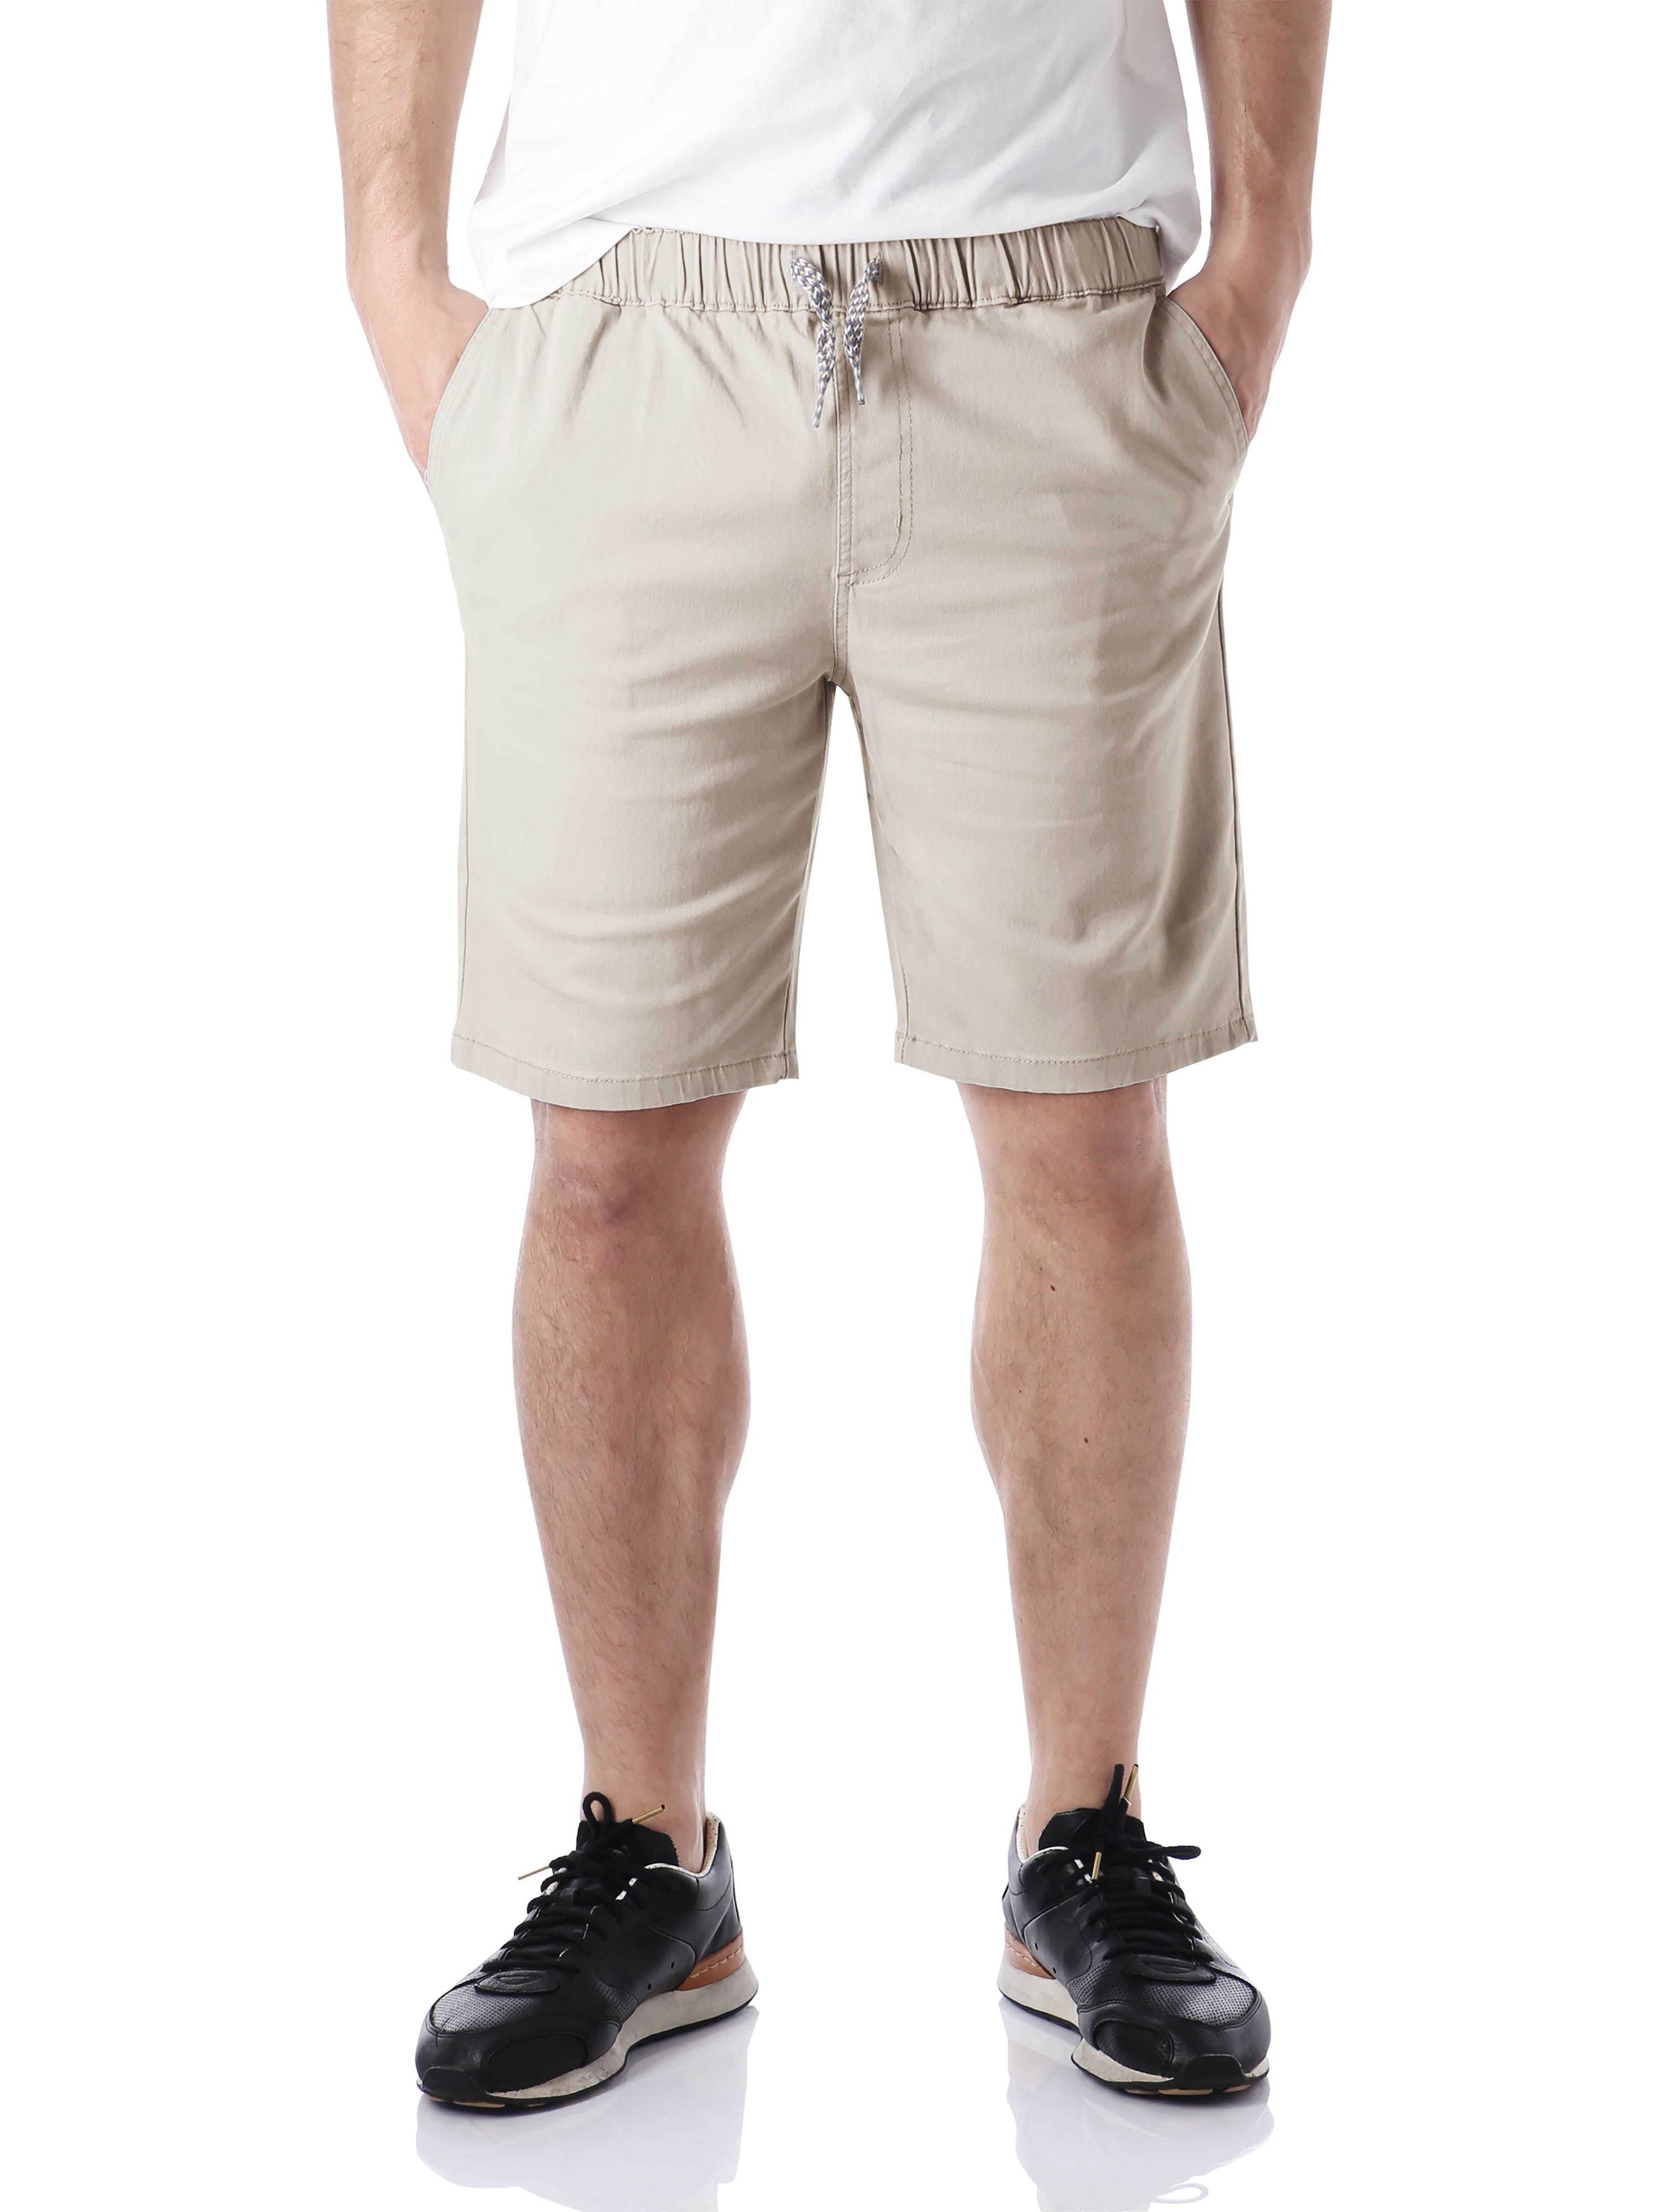 Ma Croix Men's Flat Front Summer Casual Twill Classic Slim Fit Cotton Shorts - image 1 of 6